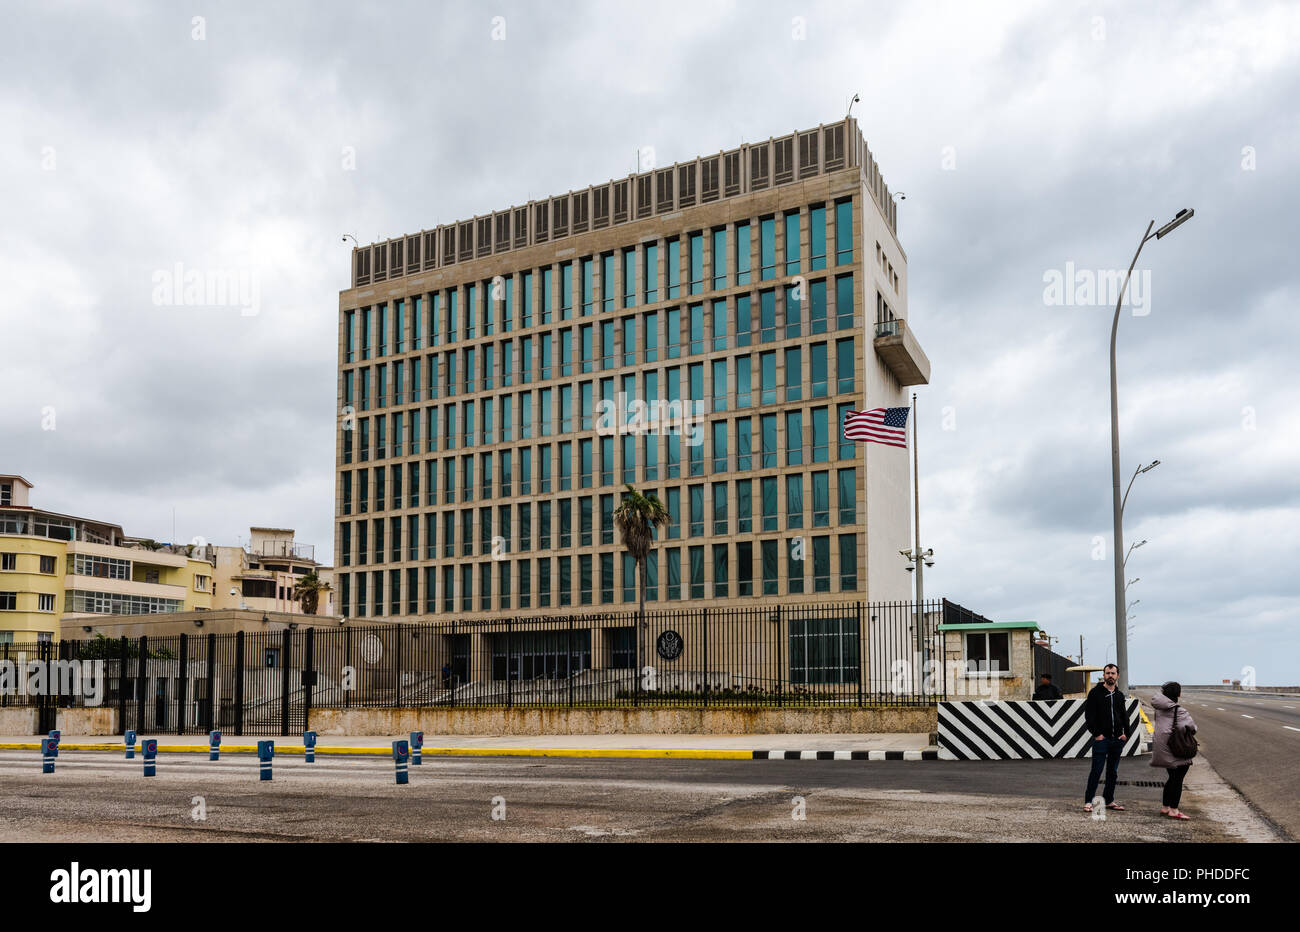 Havana, Cuba / March 21, 2016: The Embassy of the United States of America in Havana is the United States of Americas diplomatic mission in Cuba. Stock Photo